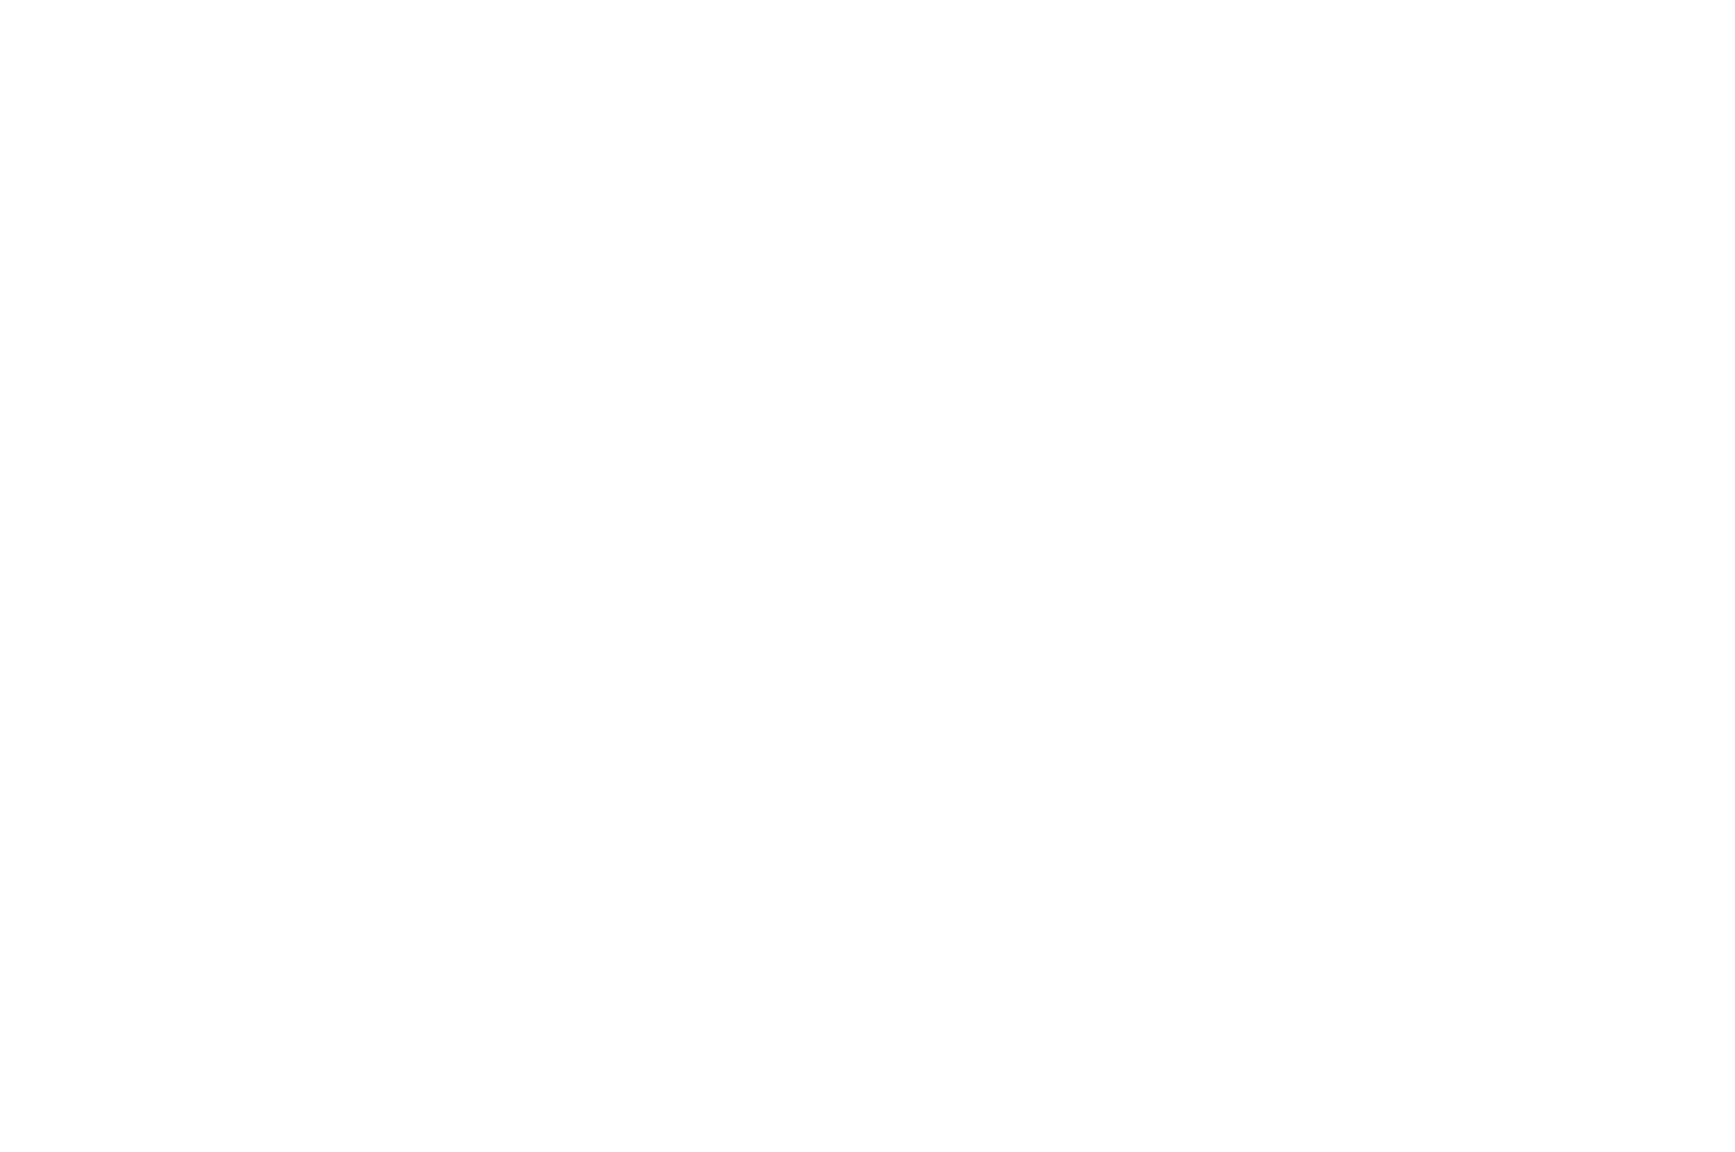 OFFICIAL SELECTION - New Jersey Indian International Film Festival NJIIFF - 2020 (2)